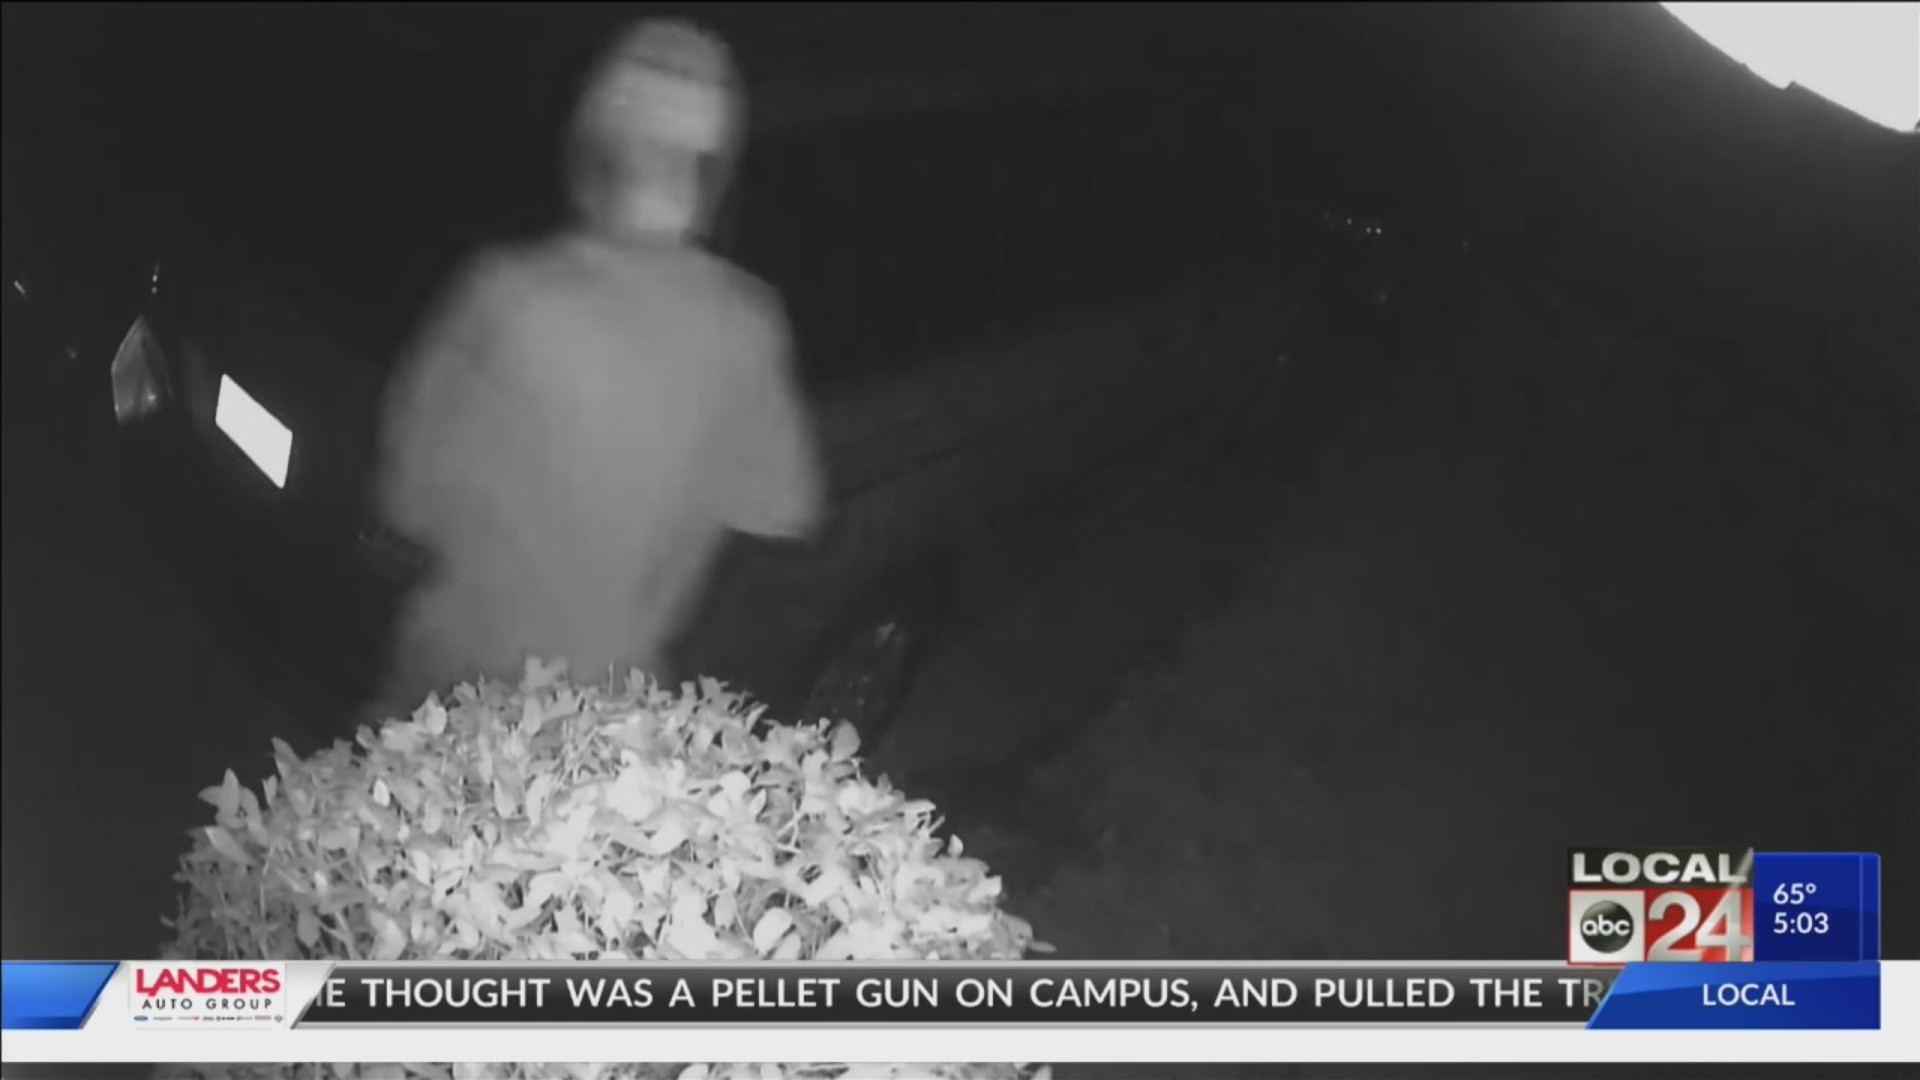 For more than a year, a man has been creeping around Lakeland area & breaking into cars